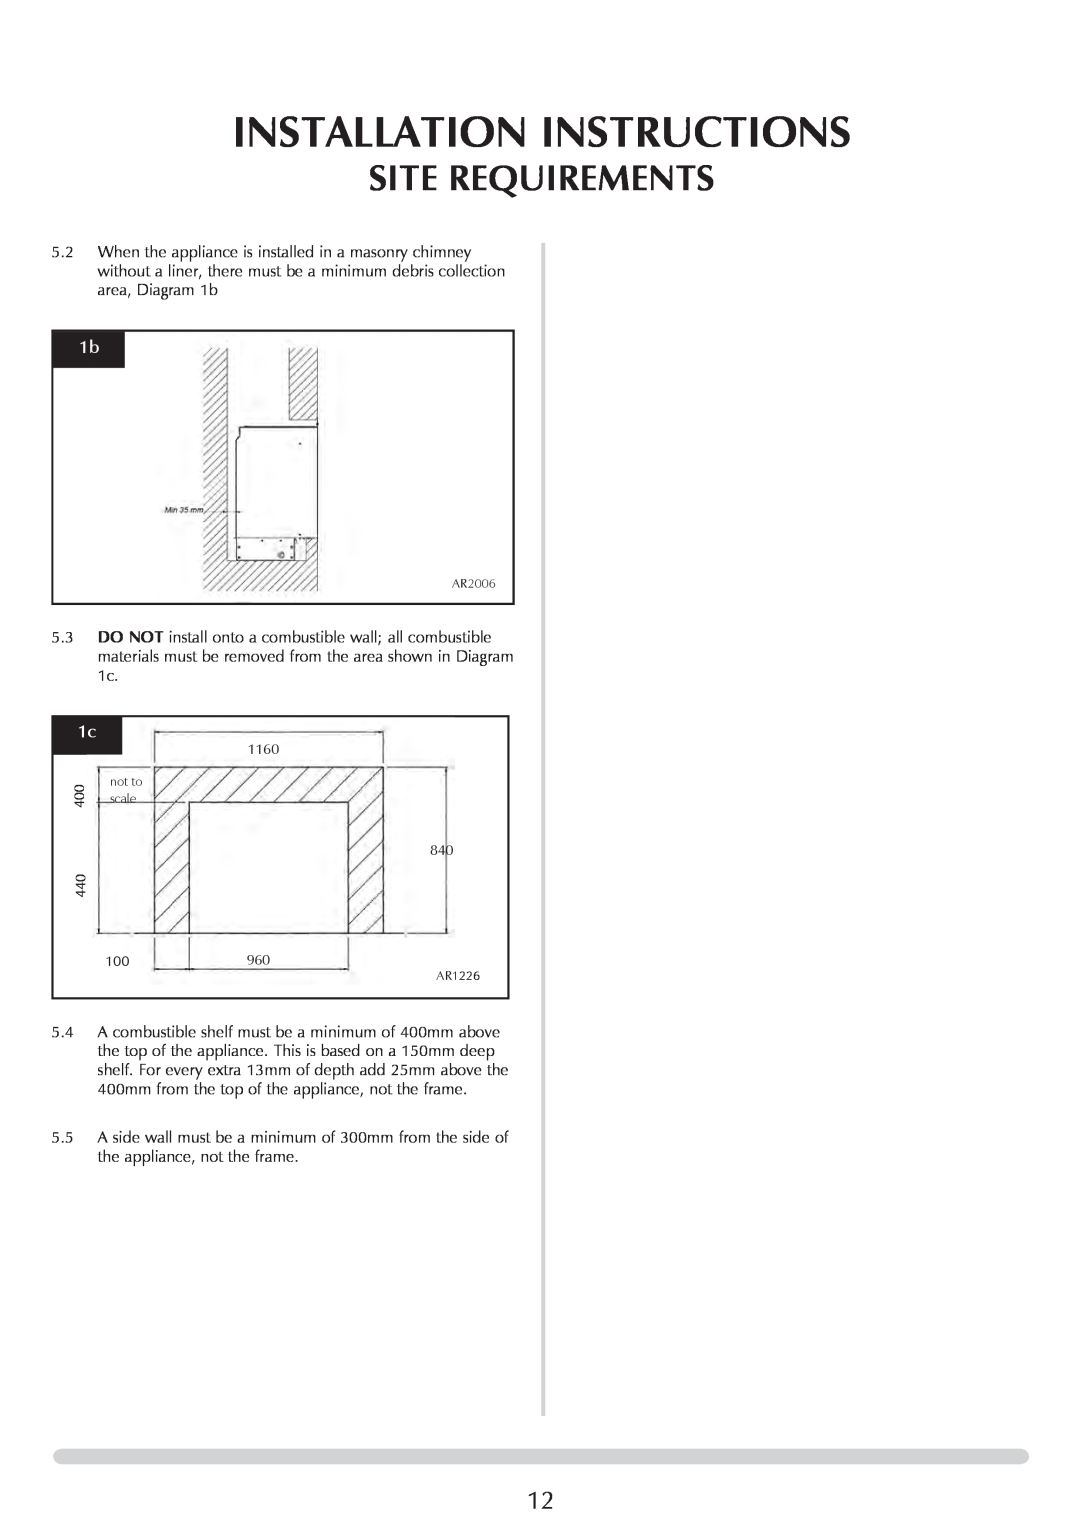 Stovax P8701CFCHEC, P8700CFCHEC manual Installation Instructions, Site Requirements 